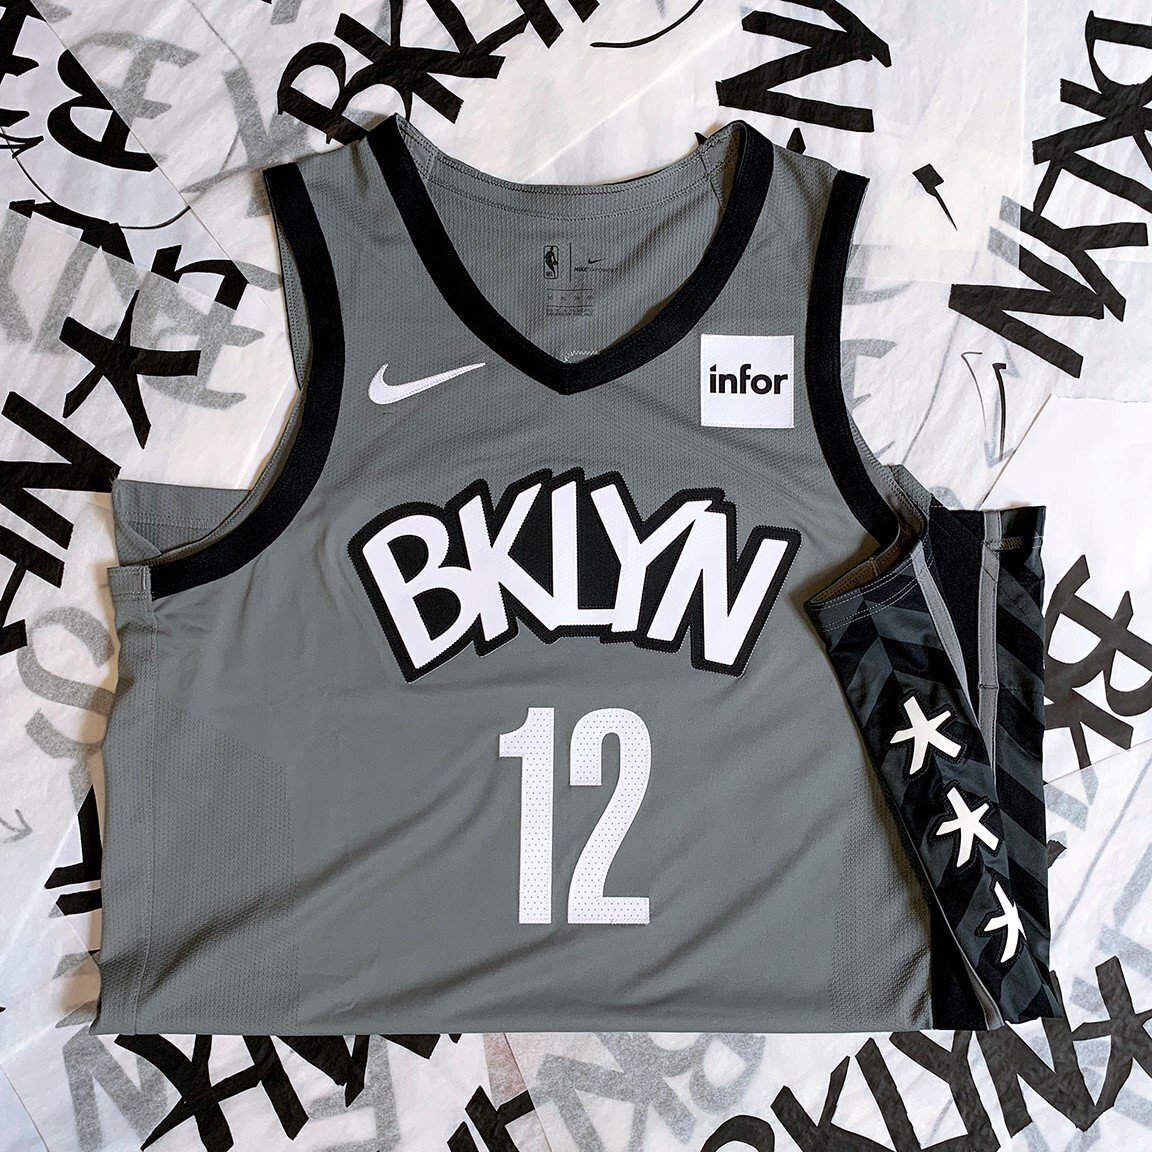 nba team with black and white uniforms